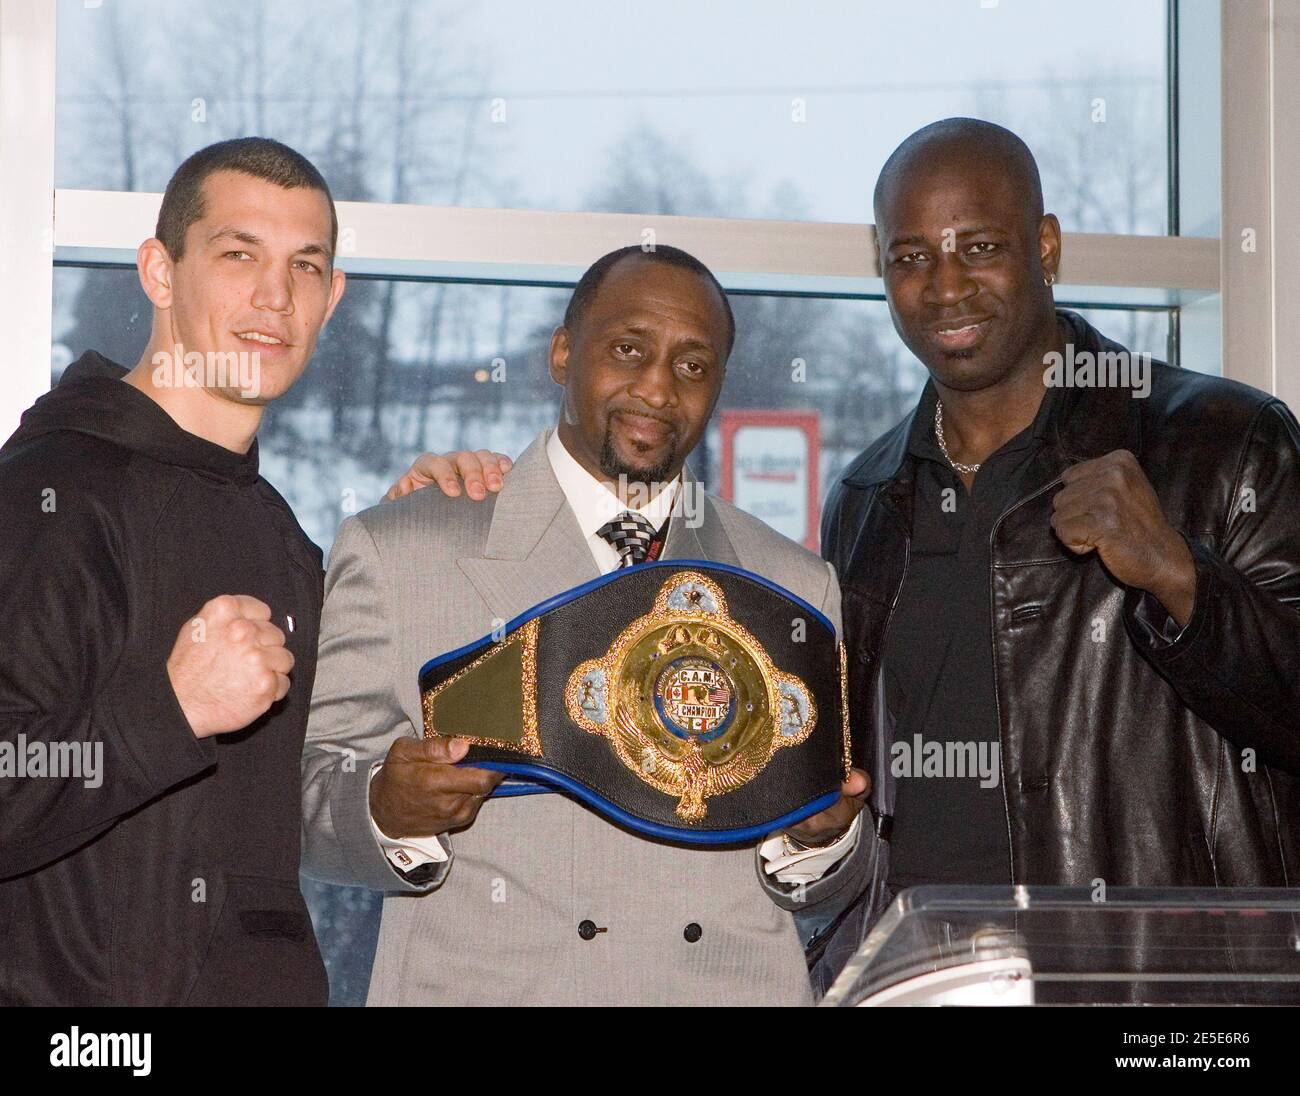 Former boxing Champion Thomas 'Hitman' Hearns holds up the CAM heavyweight  belt at the 'Rumble at the Red' press conference and weigh-in for a series  of evening boxing matches headlined by a